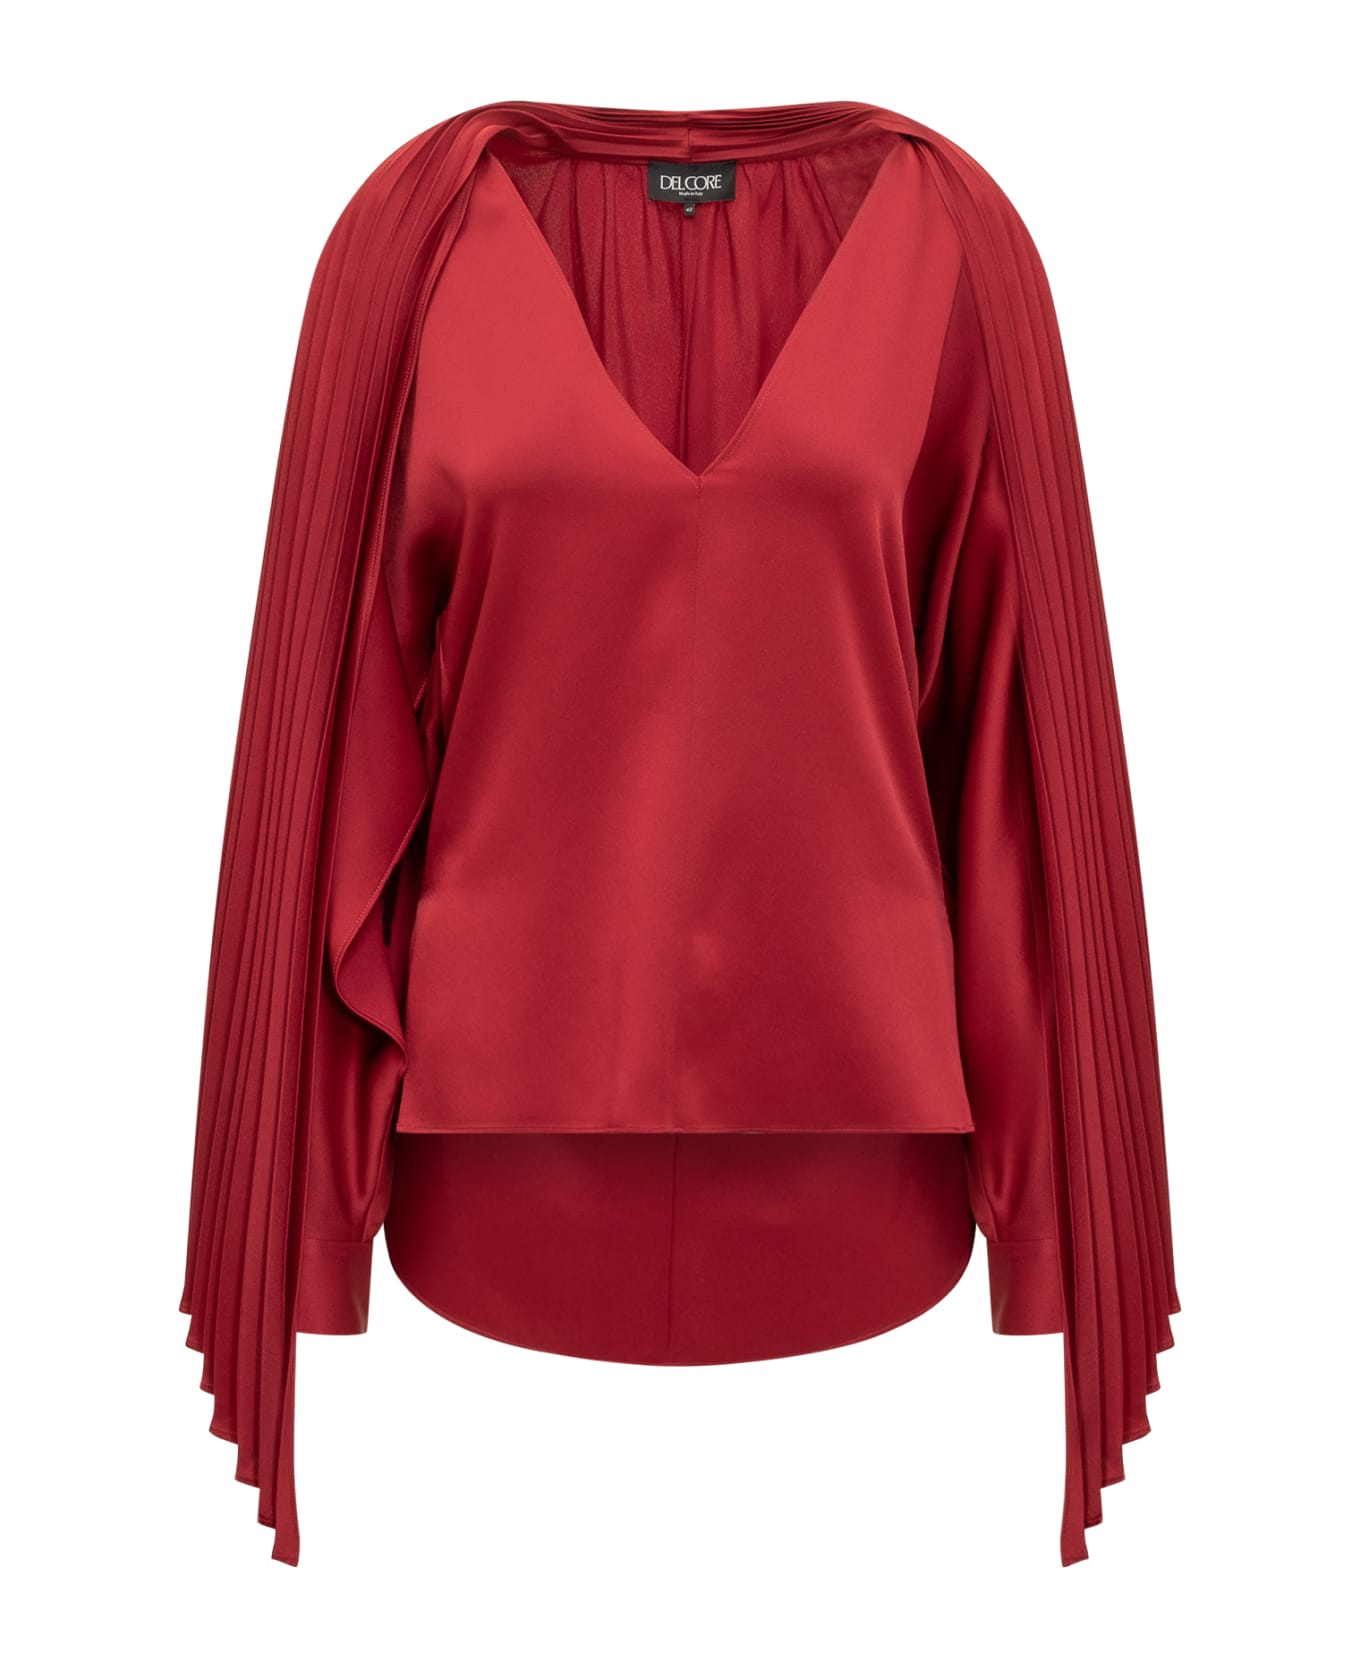 Del Core Draped Top With Scarf - Red